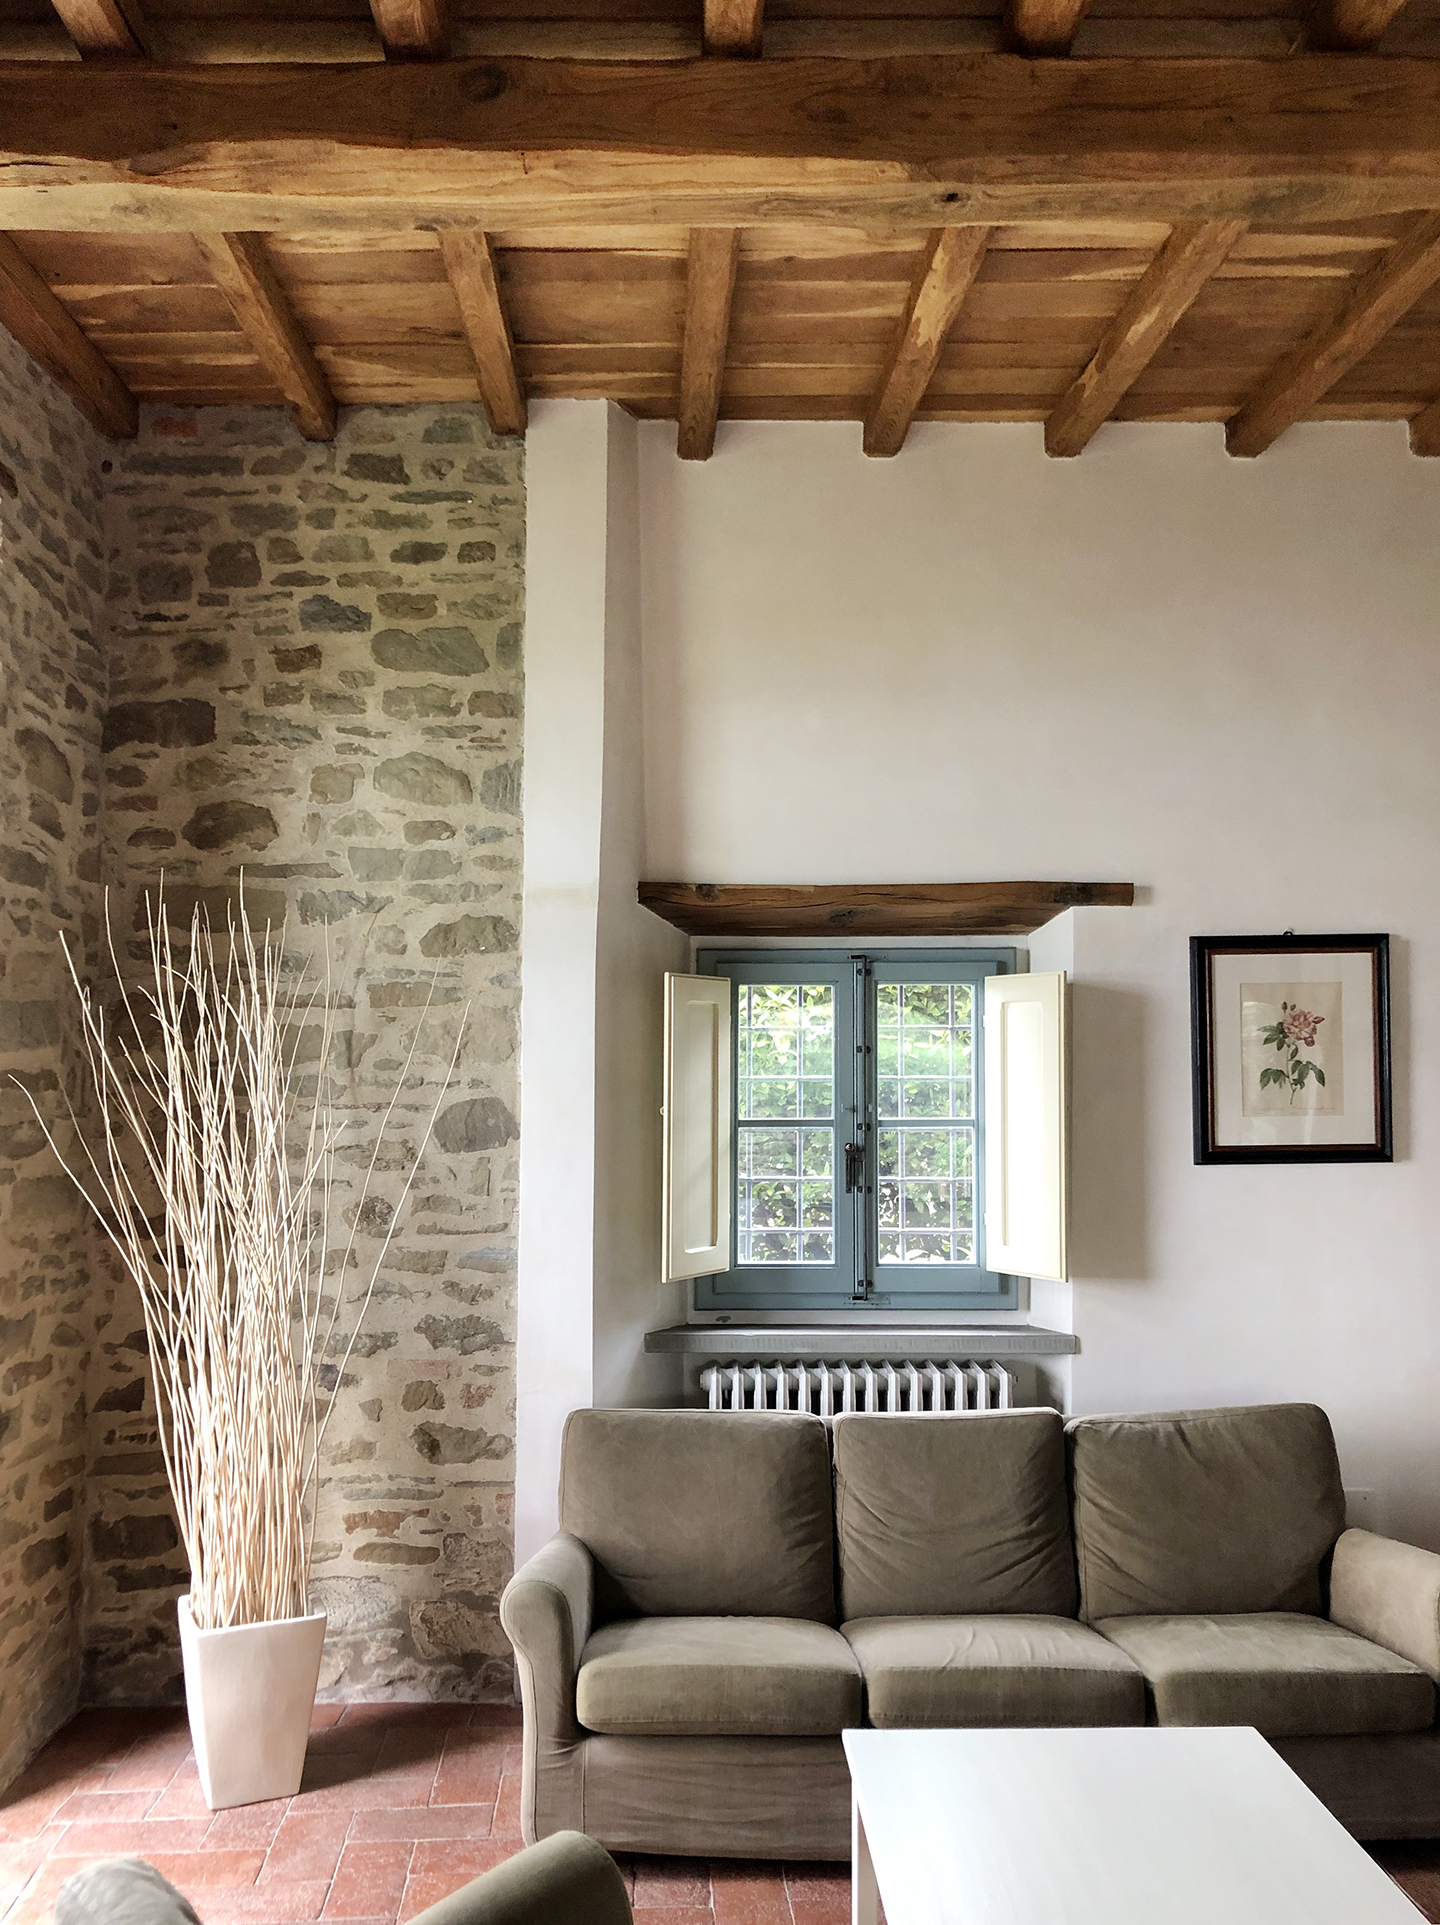 Step inside the Airbnb of your dreams! Inspiring Neutral Decor In The Mountains of Tuscany /// By Design Fixation #italy #neutral #decor